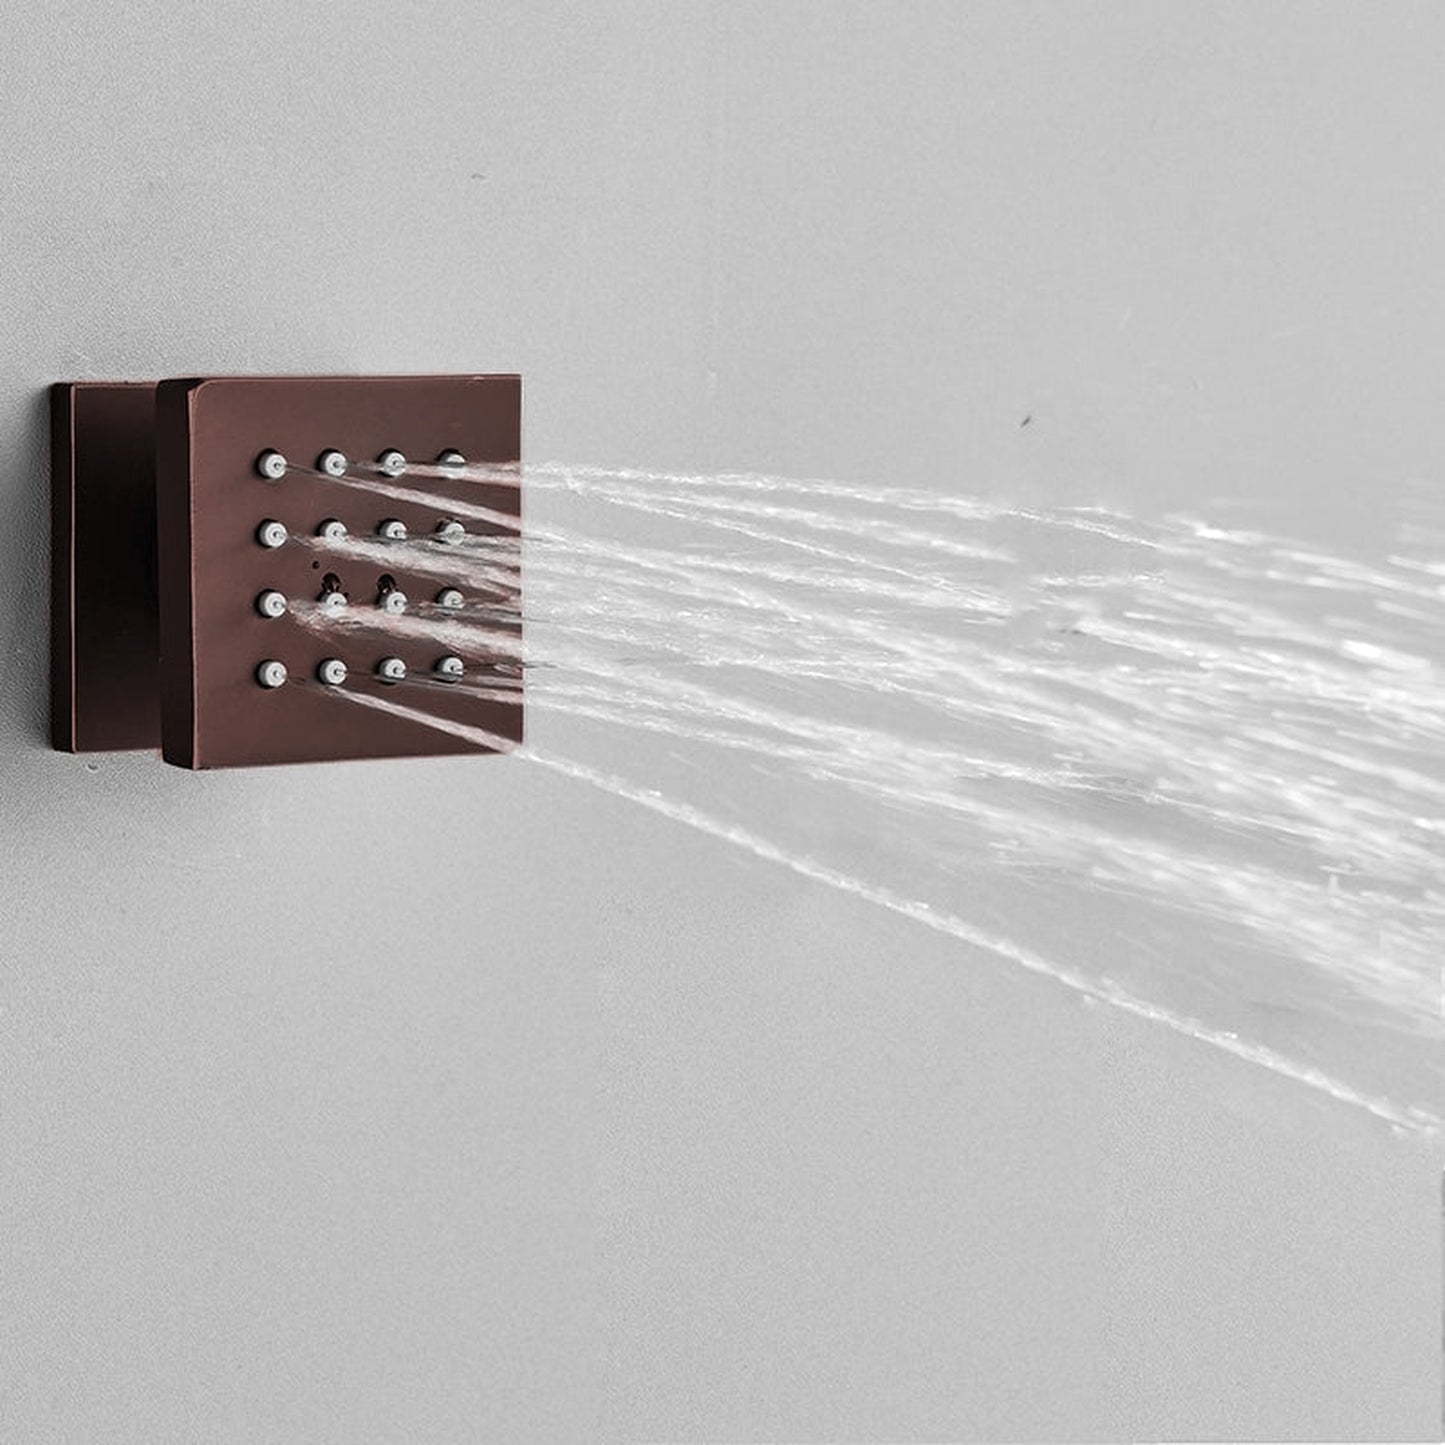 Fontana Sierra 10" Light Oil Rubbed Bronze Square Wall-Mounted LED Shower System With 6-Jet Body Sprays and Hand Shower